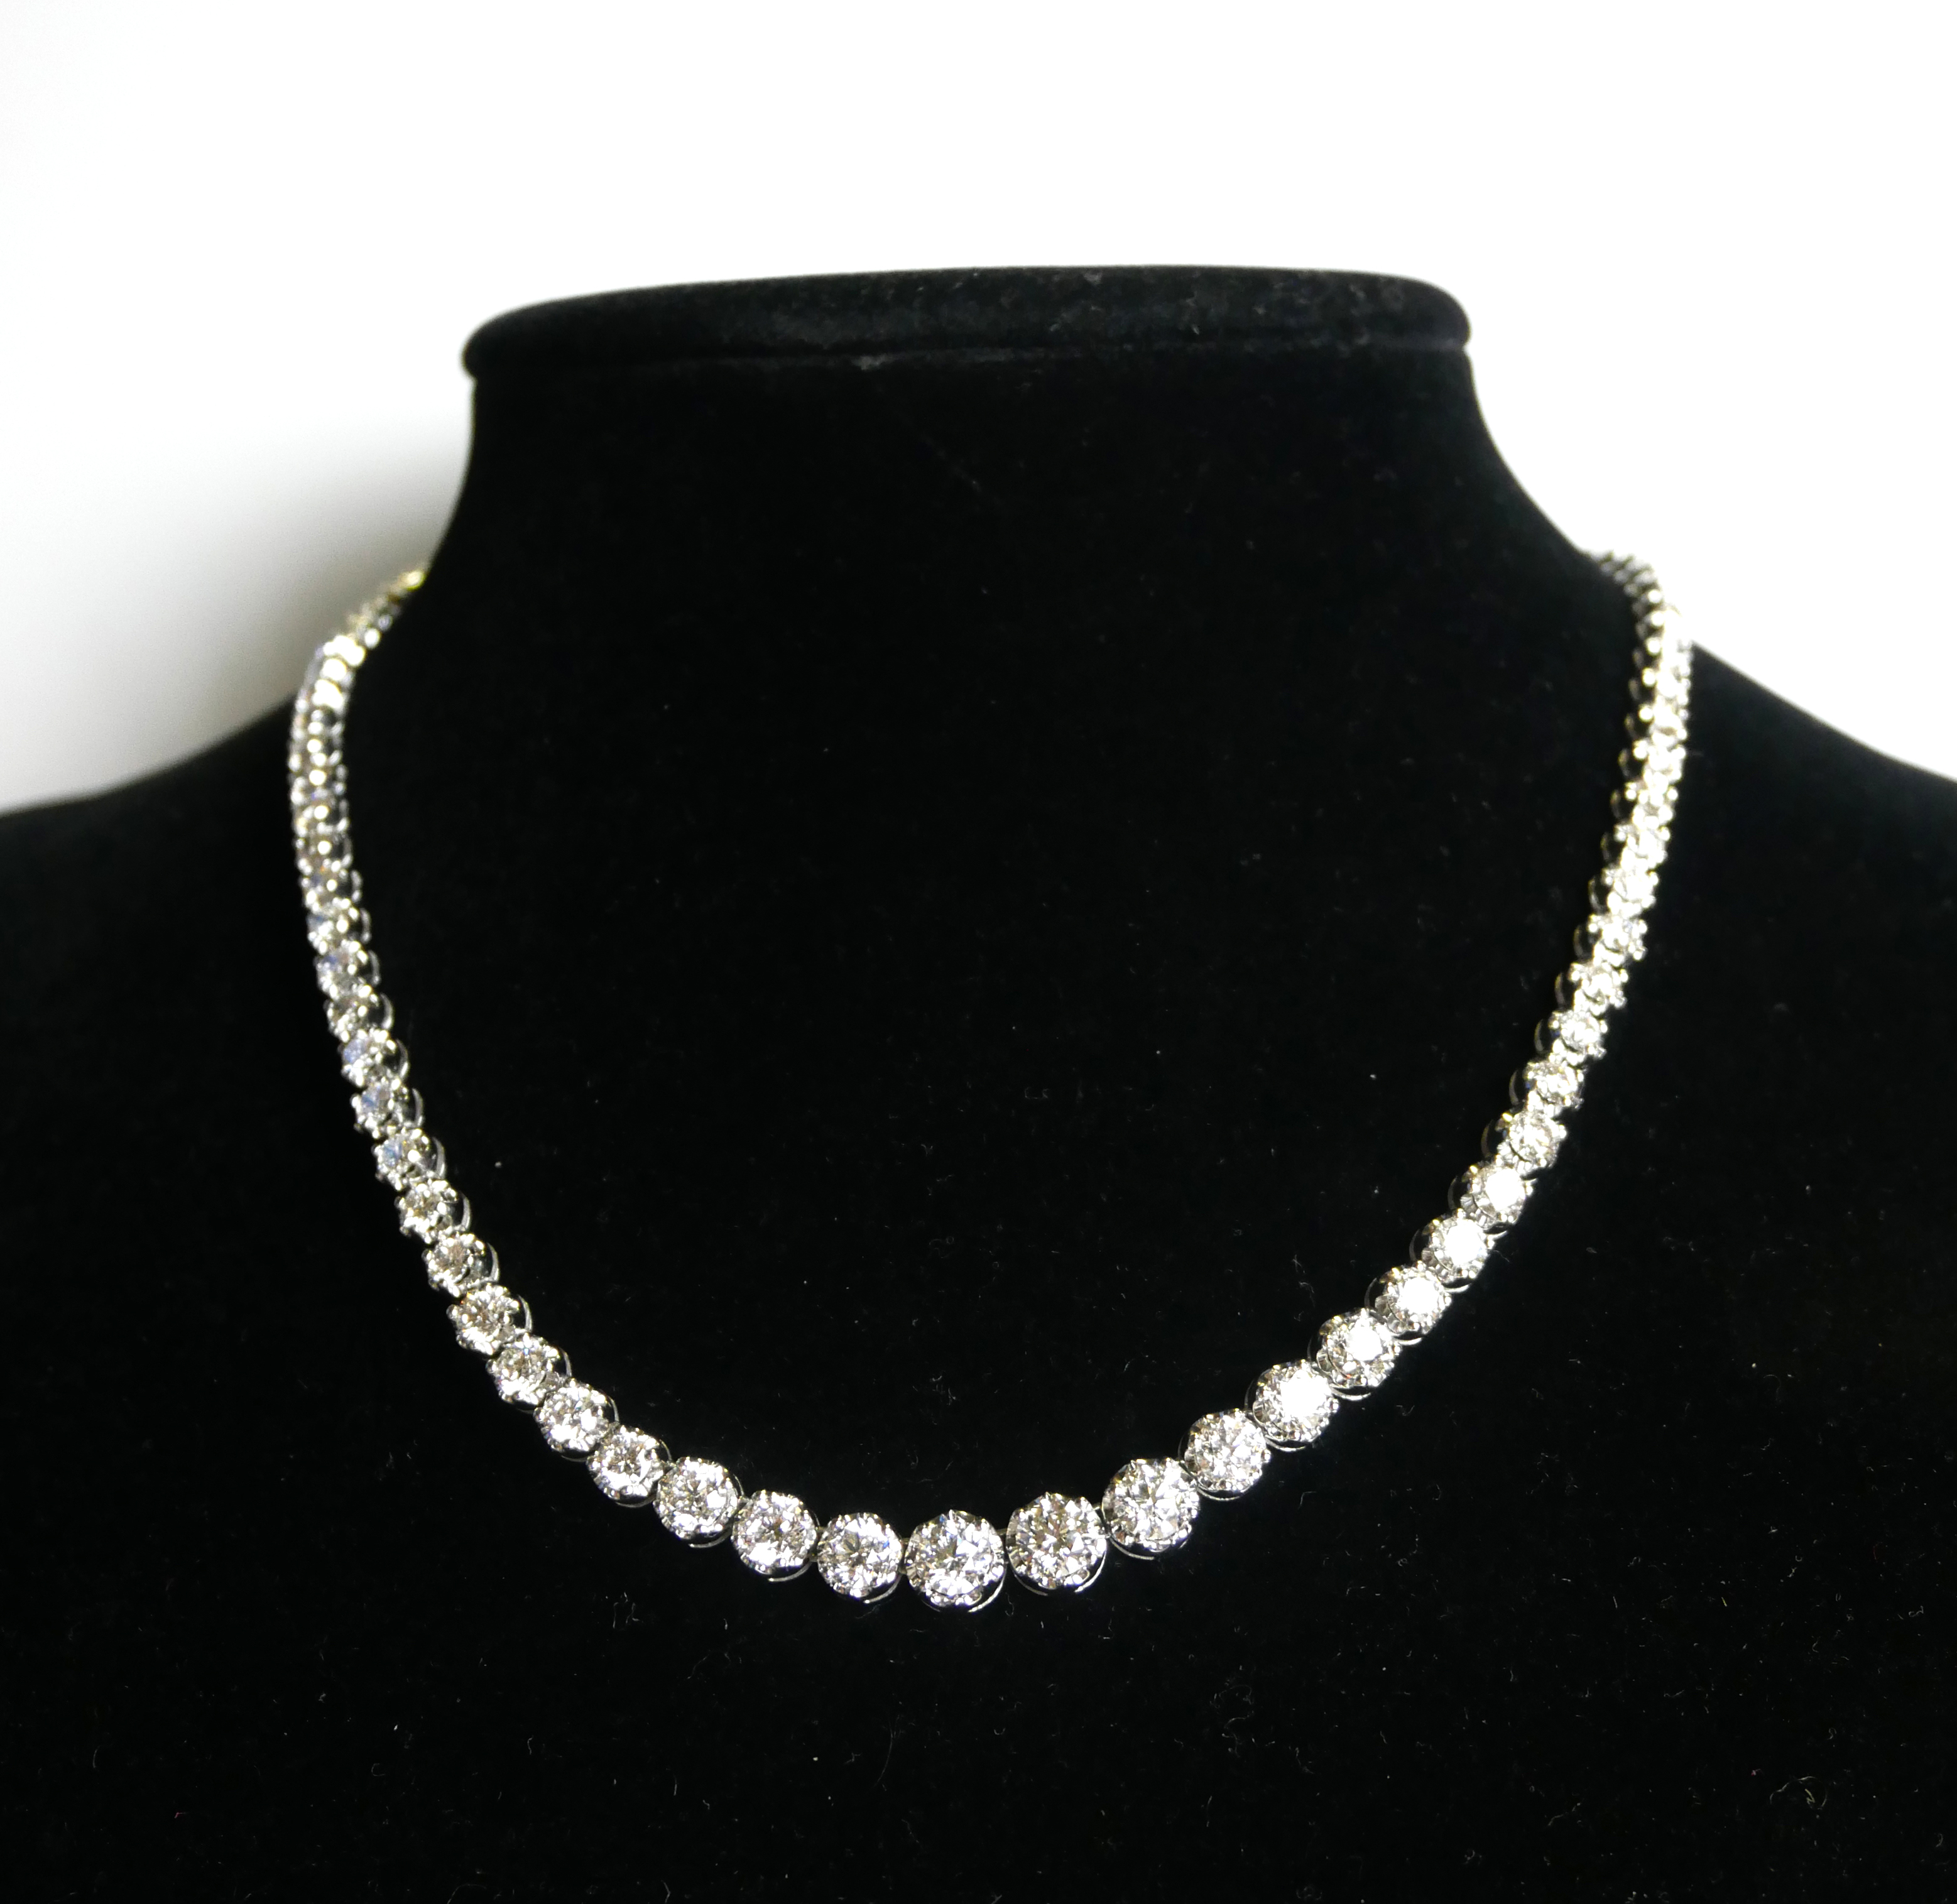 AN 18CT WHITE GOLD AND GRADUATED ROUND BRILLIANT CUT DIAMOND ETERNITY NECKLACE. (approx diamond